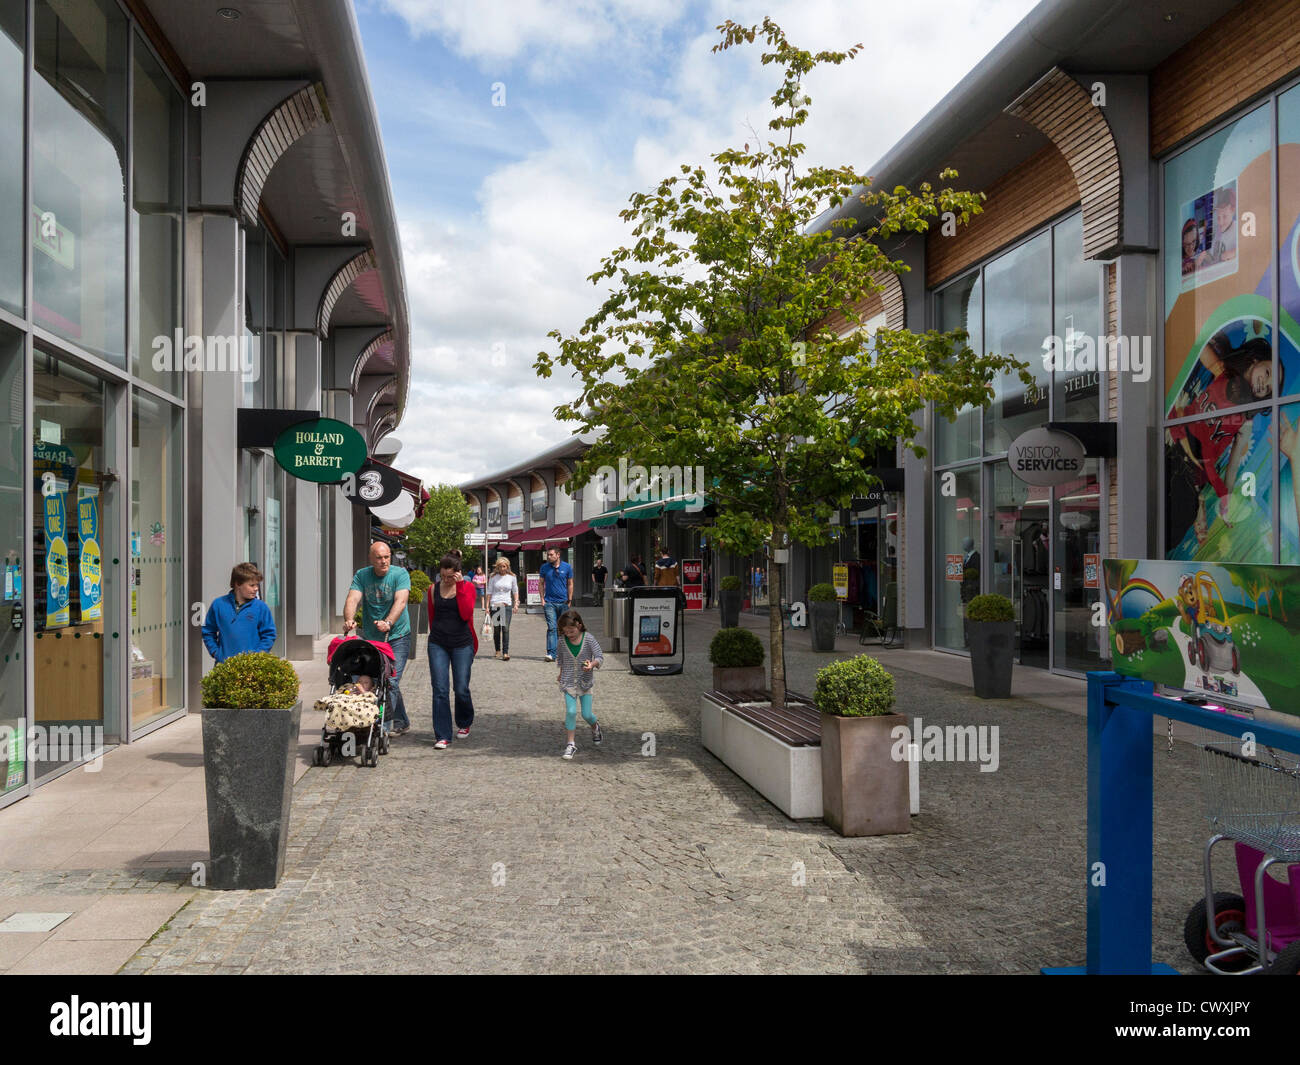 Shoppers at The Outlet, Banbridge, County Down, Northern Ireland Stock Photo